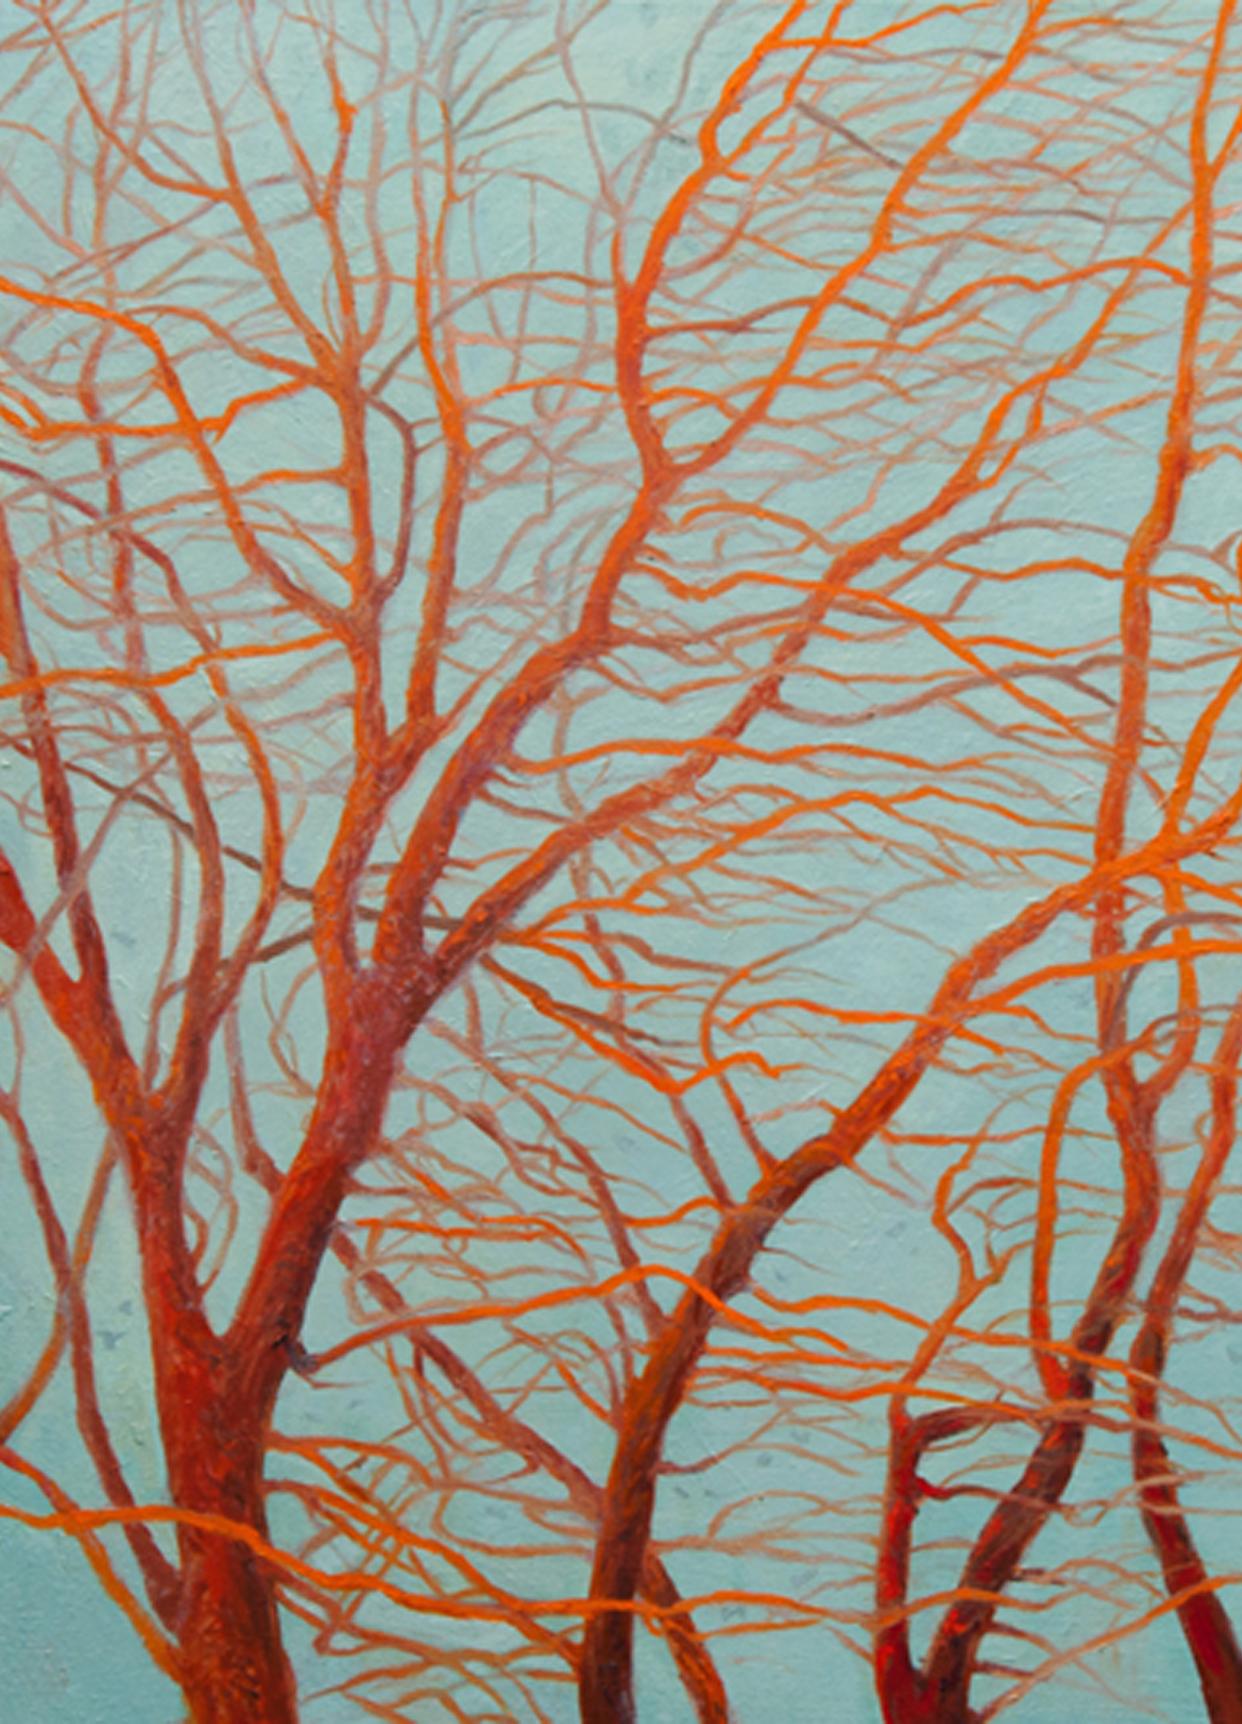 This triptych painting was inspired by an enormous tree, glowing red and orange, lit by the setting sun. I was fascinated by the families of branches spreading from and beyond the trunk; reaching out and through. It is hard to say where one stops